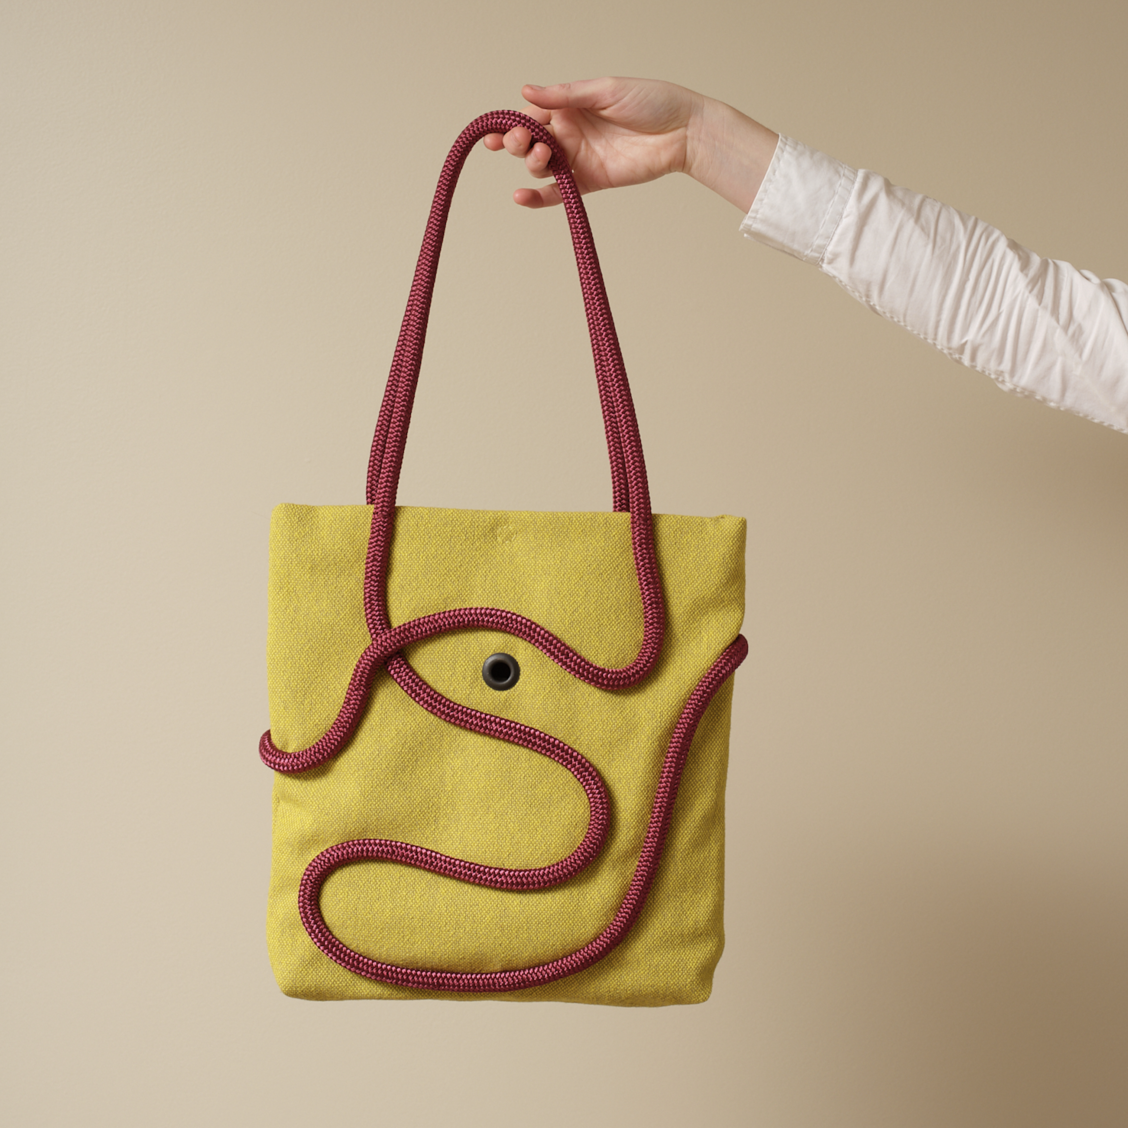 Weekly Objects #1: Vita Cochran, Rope Bag for O Space (yellow